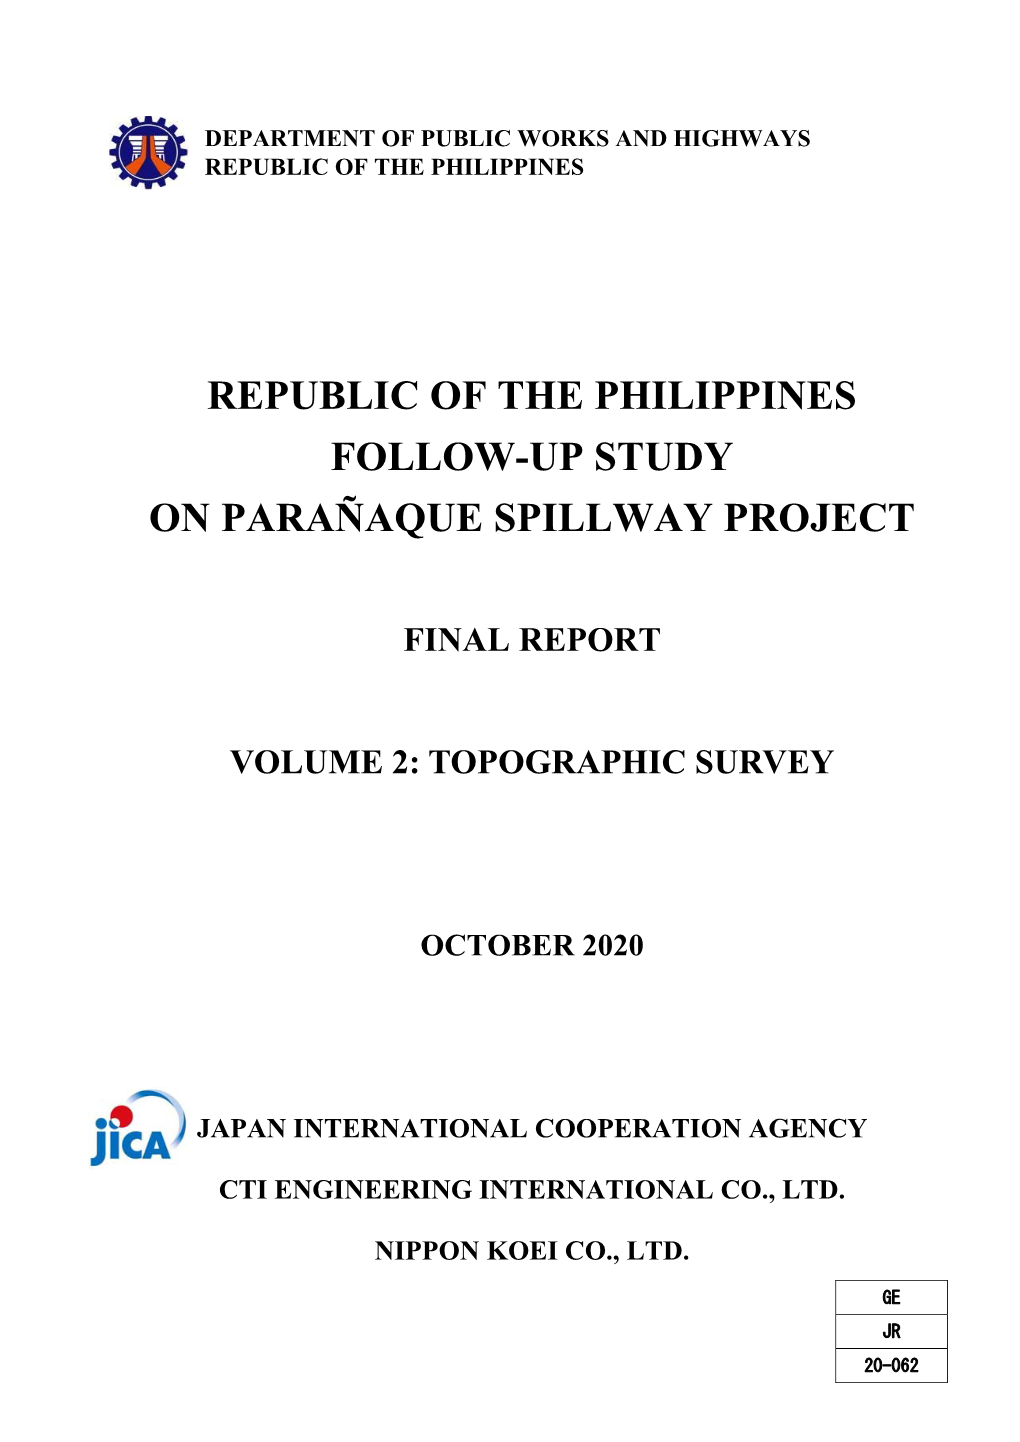 Republic of the Philippines Follow-Up Study on Parañaque Spillway Project